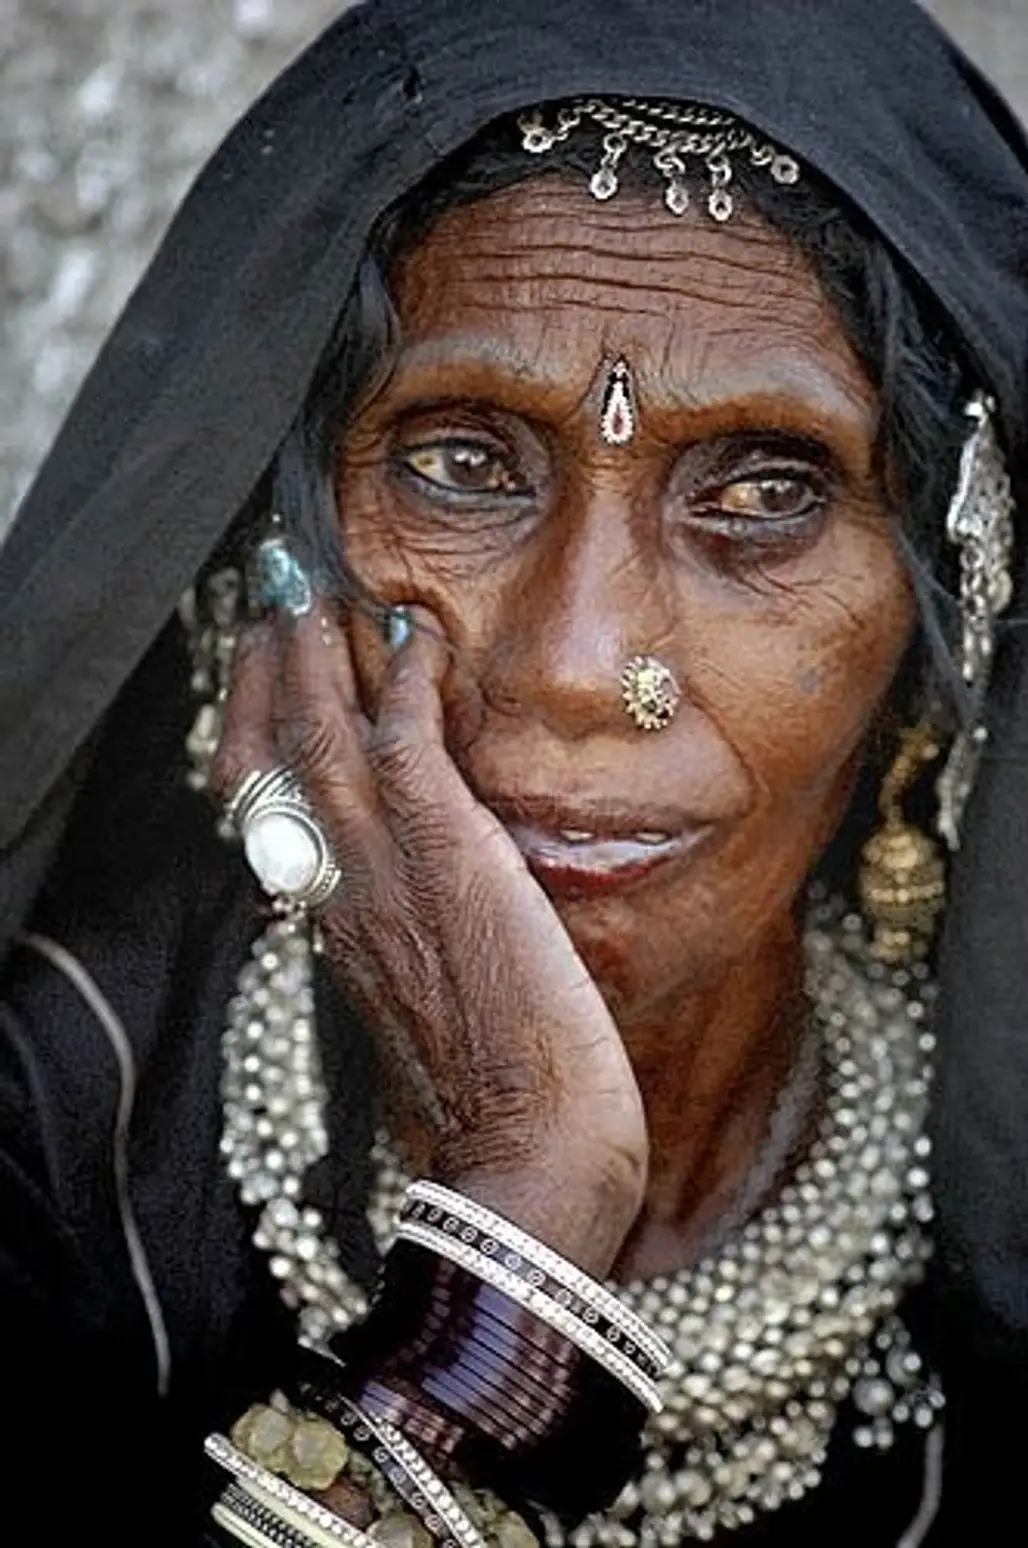 A Semi-nomad Woman from Rajasthan